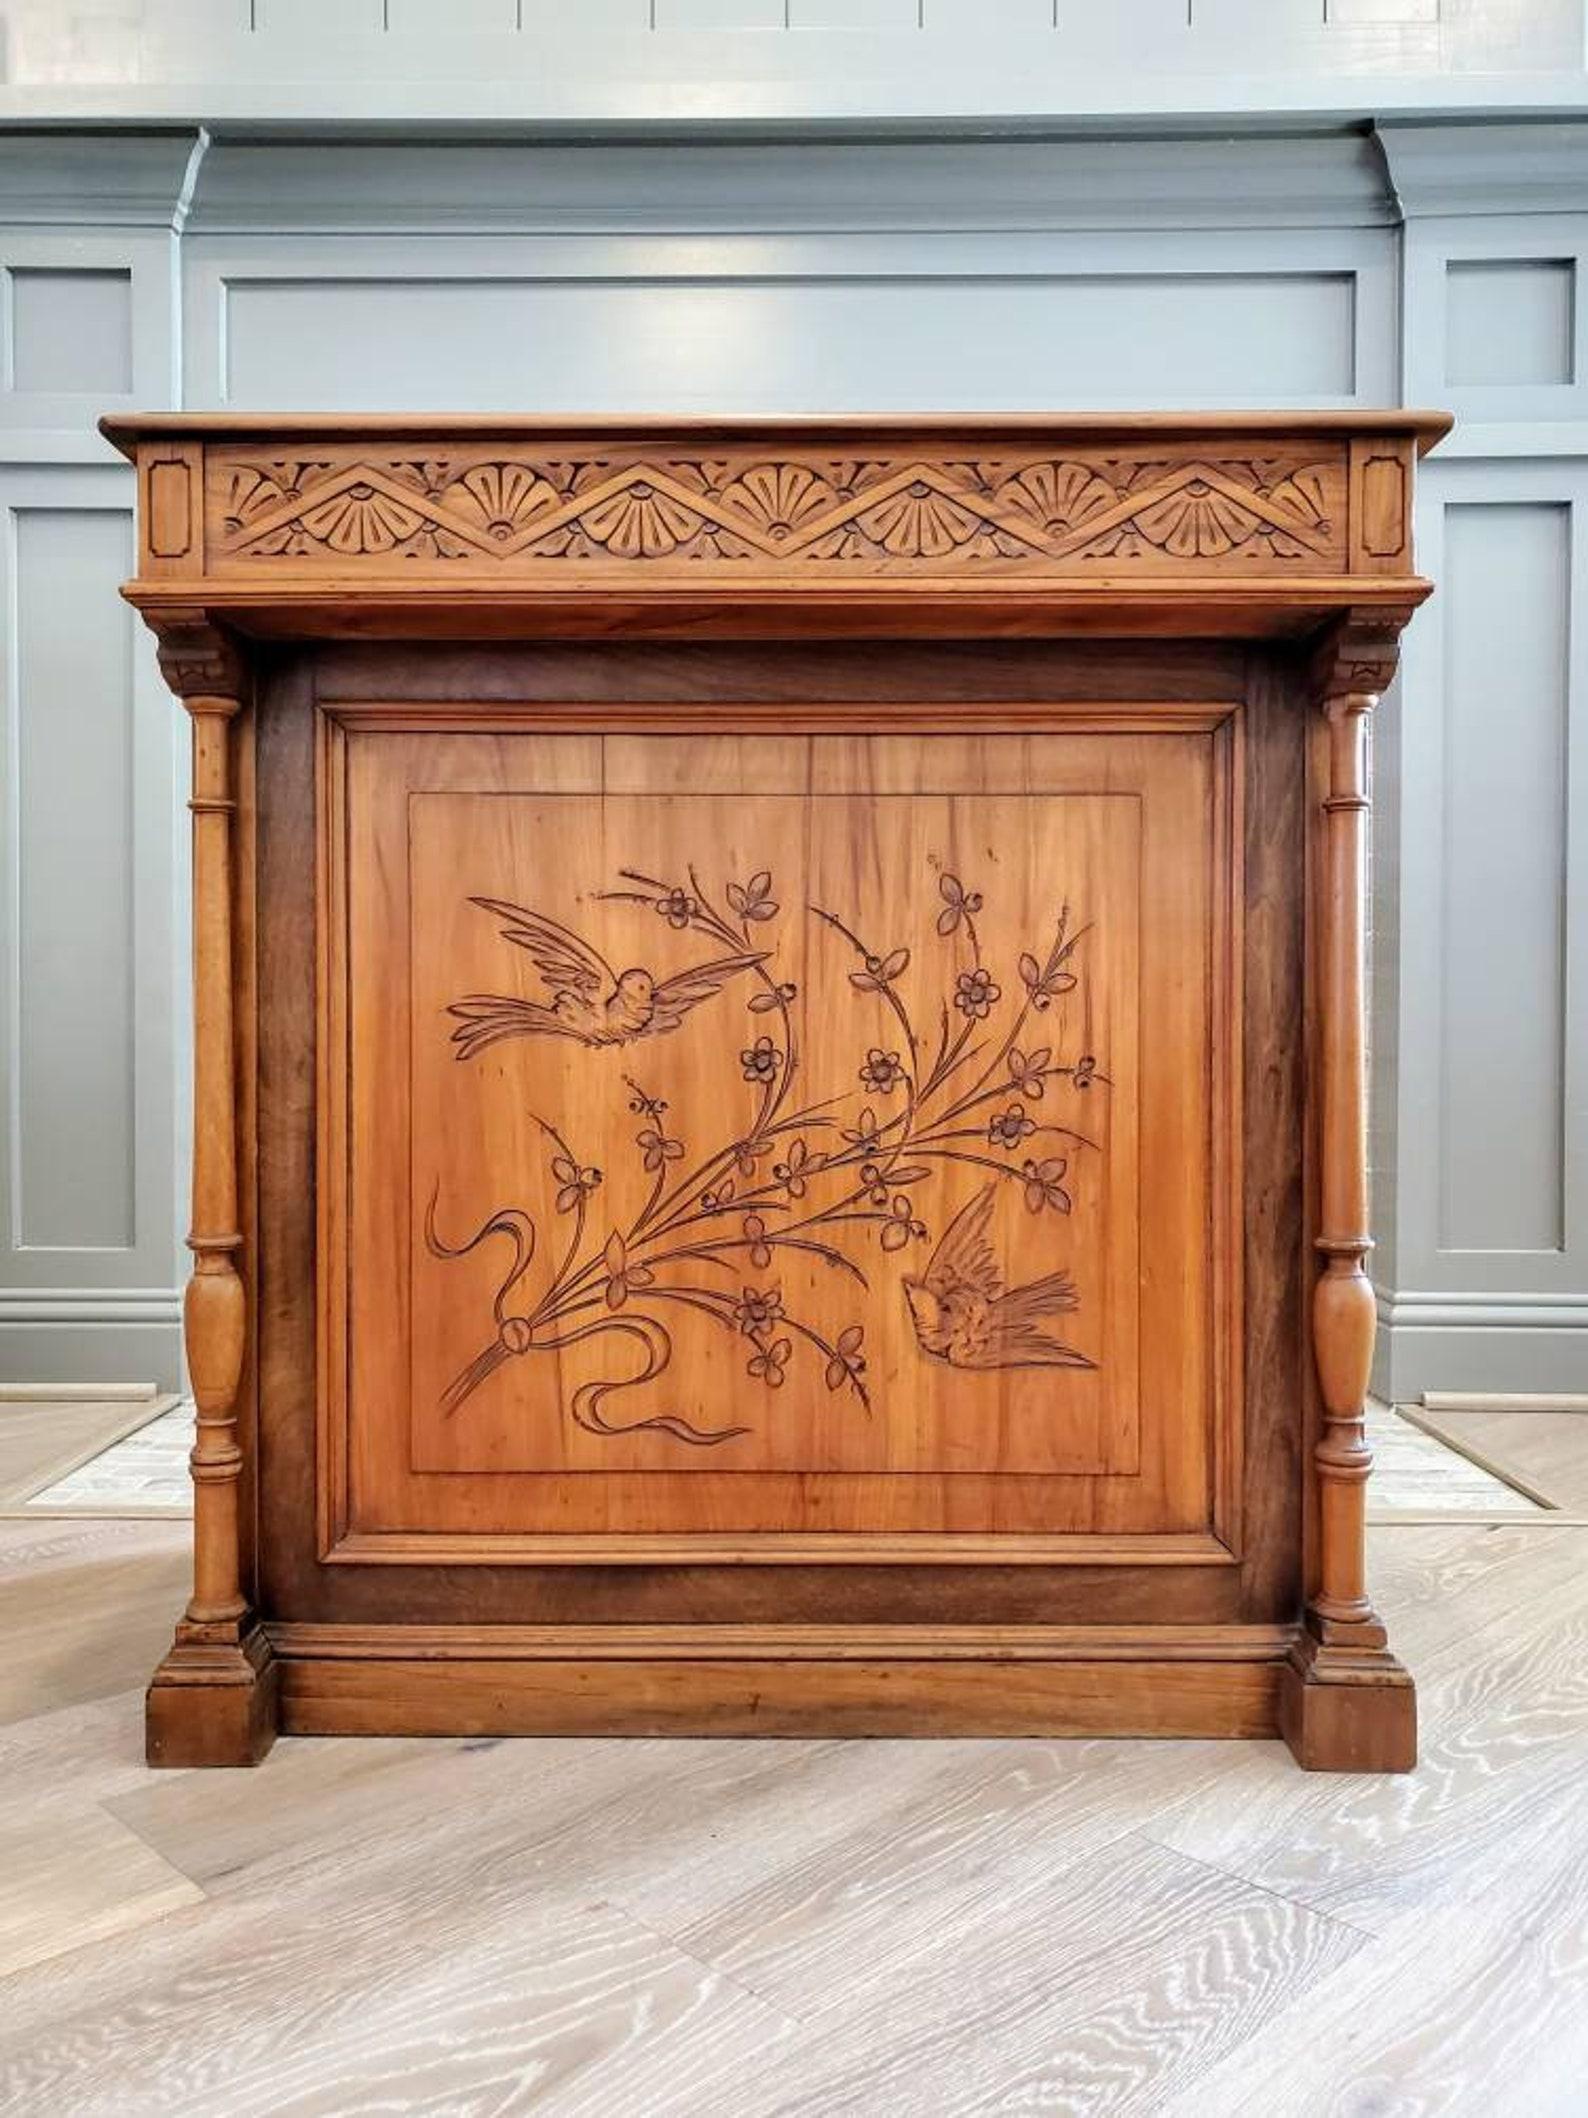 An exquisite freestanding hotel clerk's desk from the late 19th century. Born in France, durning the Victorian era, exceptionally executed in period Aesthetic Movement style, serenity with Eastern influence, having a single locking frieze drawer